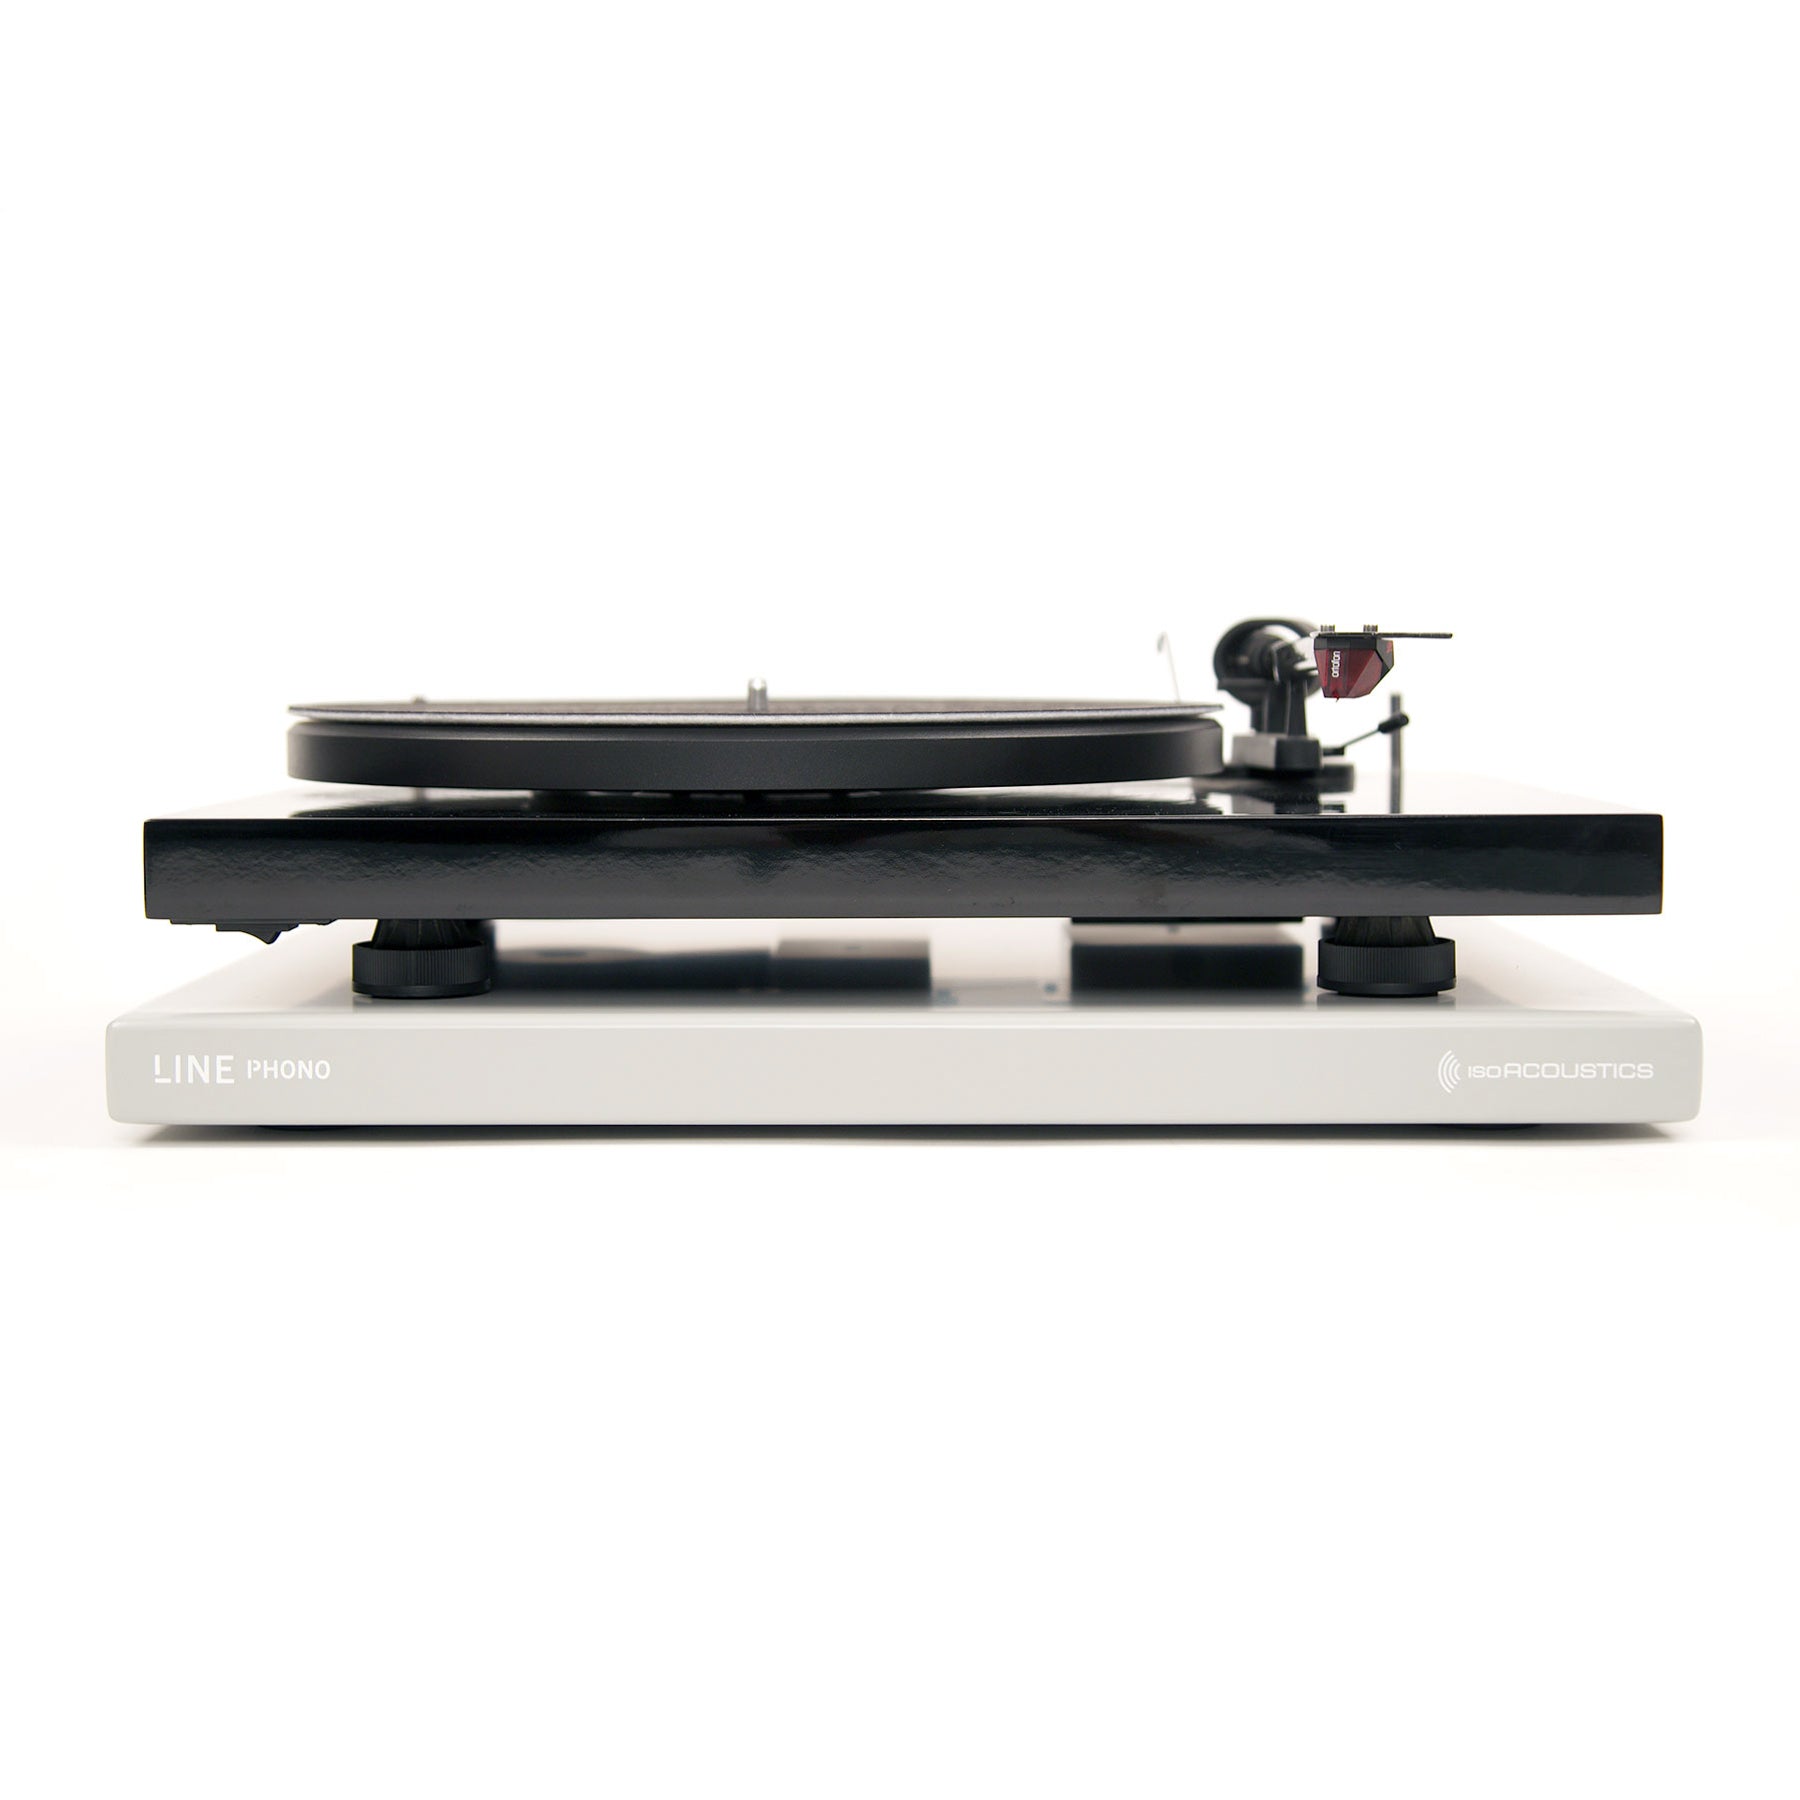 Turntable Stand by Line Phono - Ideal Turntable Furniture